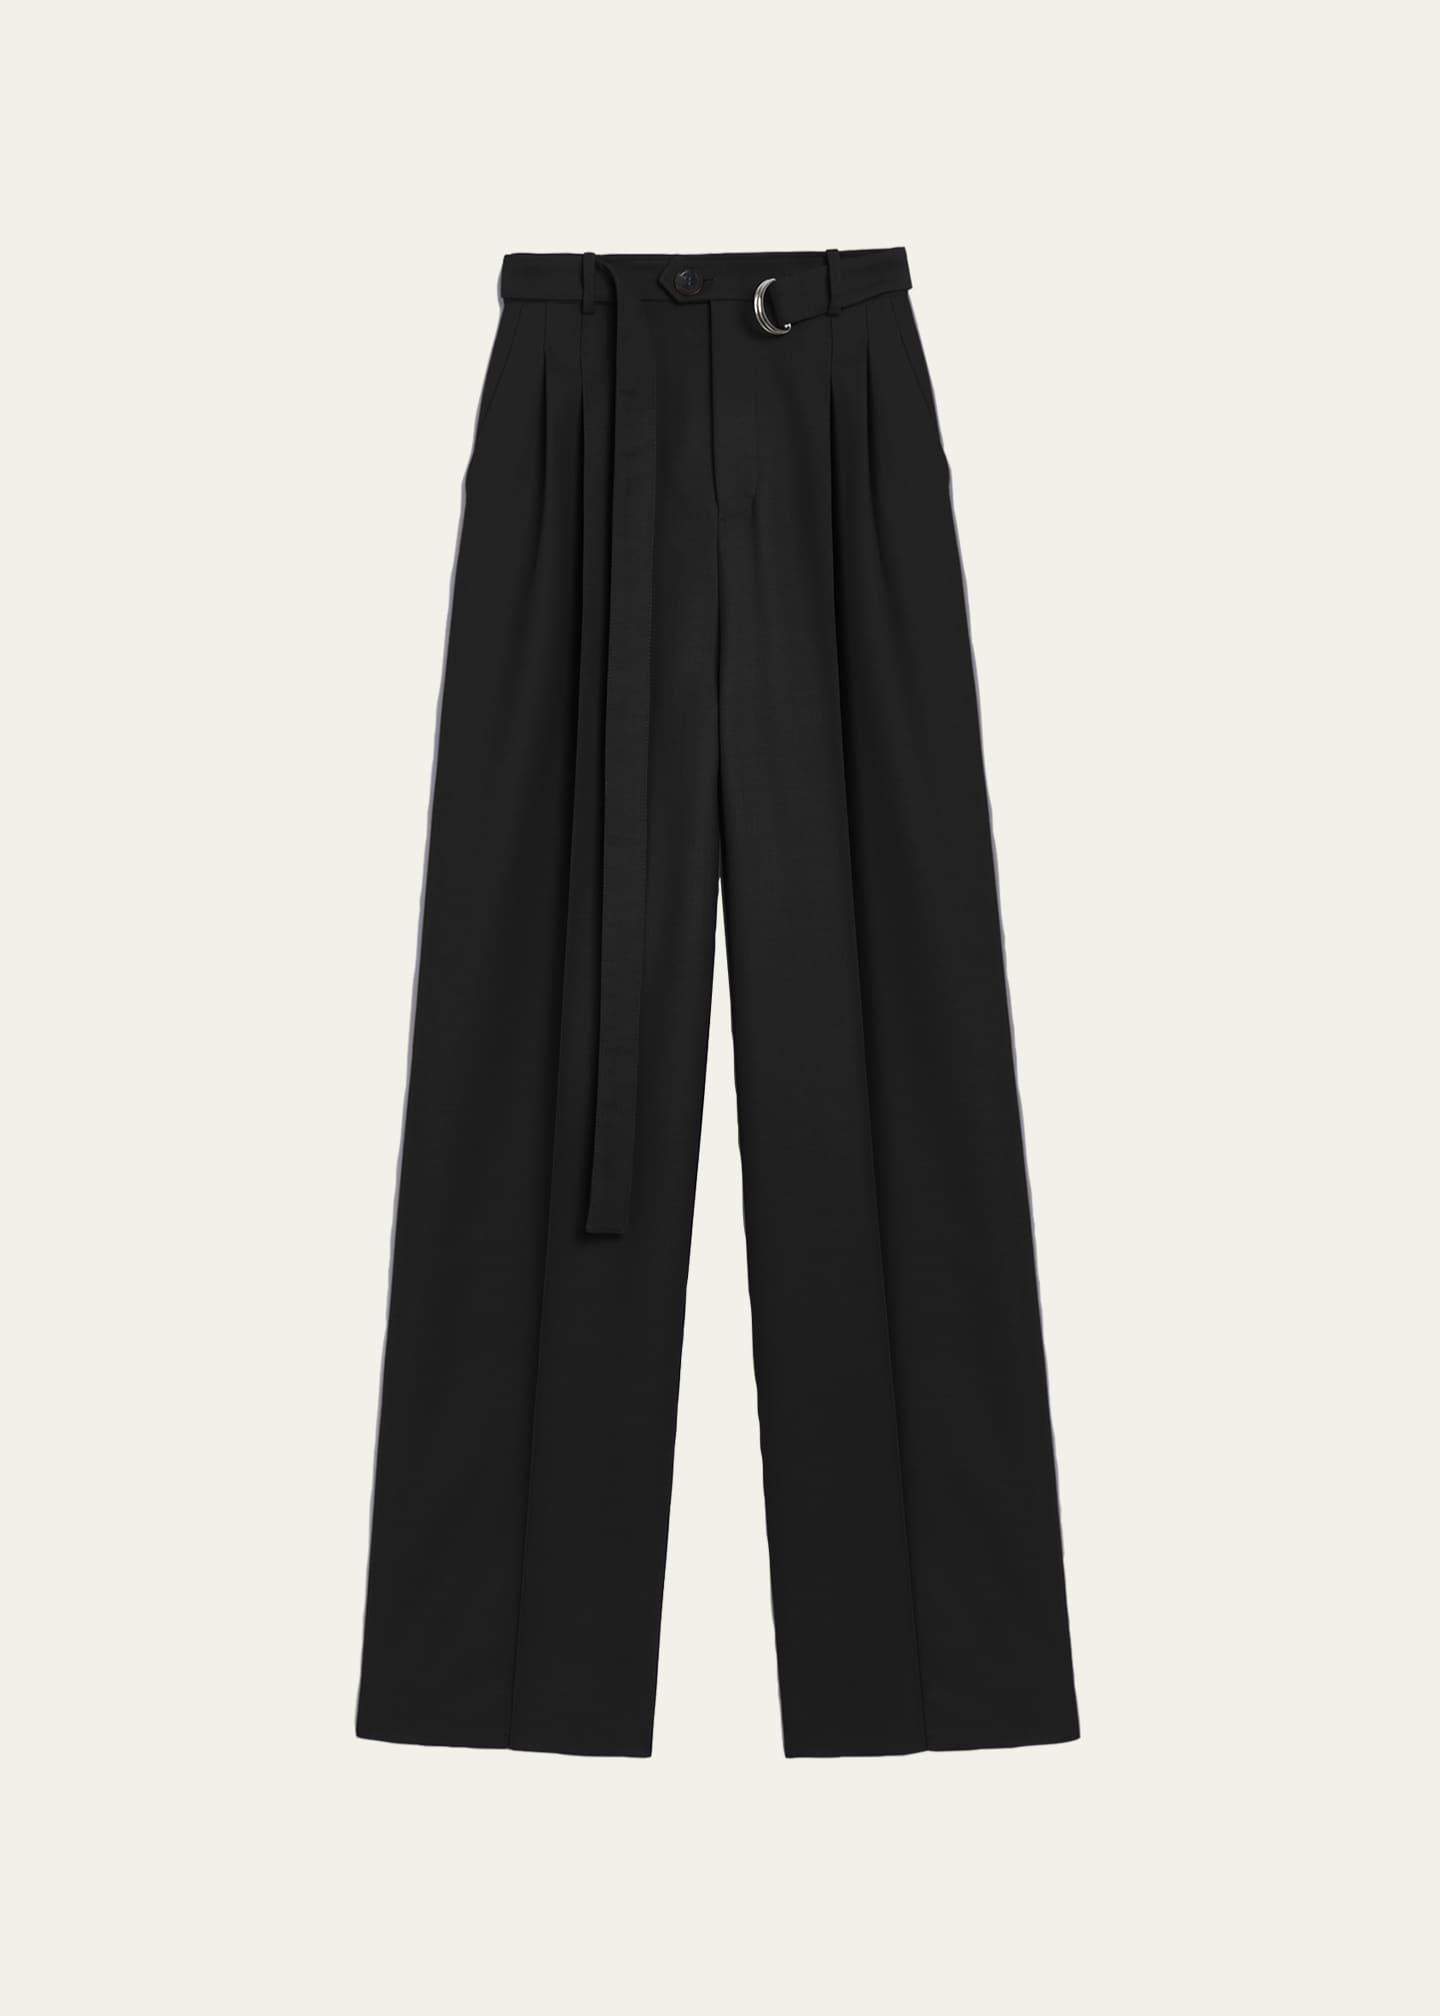 Peter Do Signature Belted Tailored Wool Pants - Bergdorf Goodman